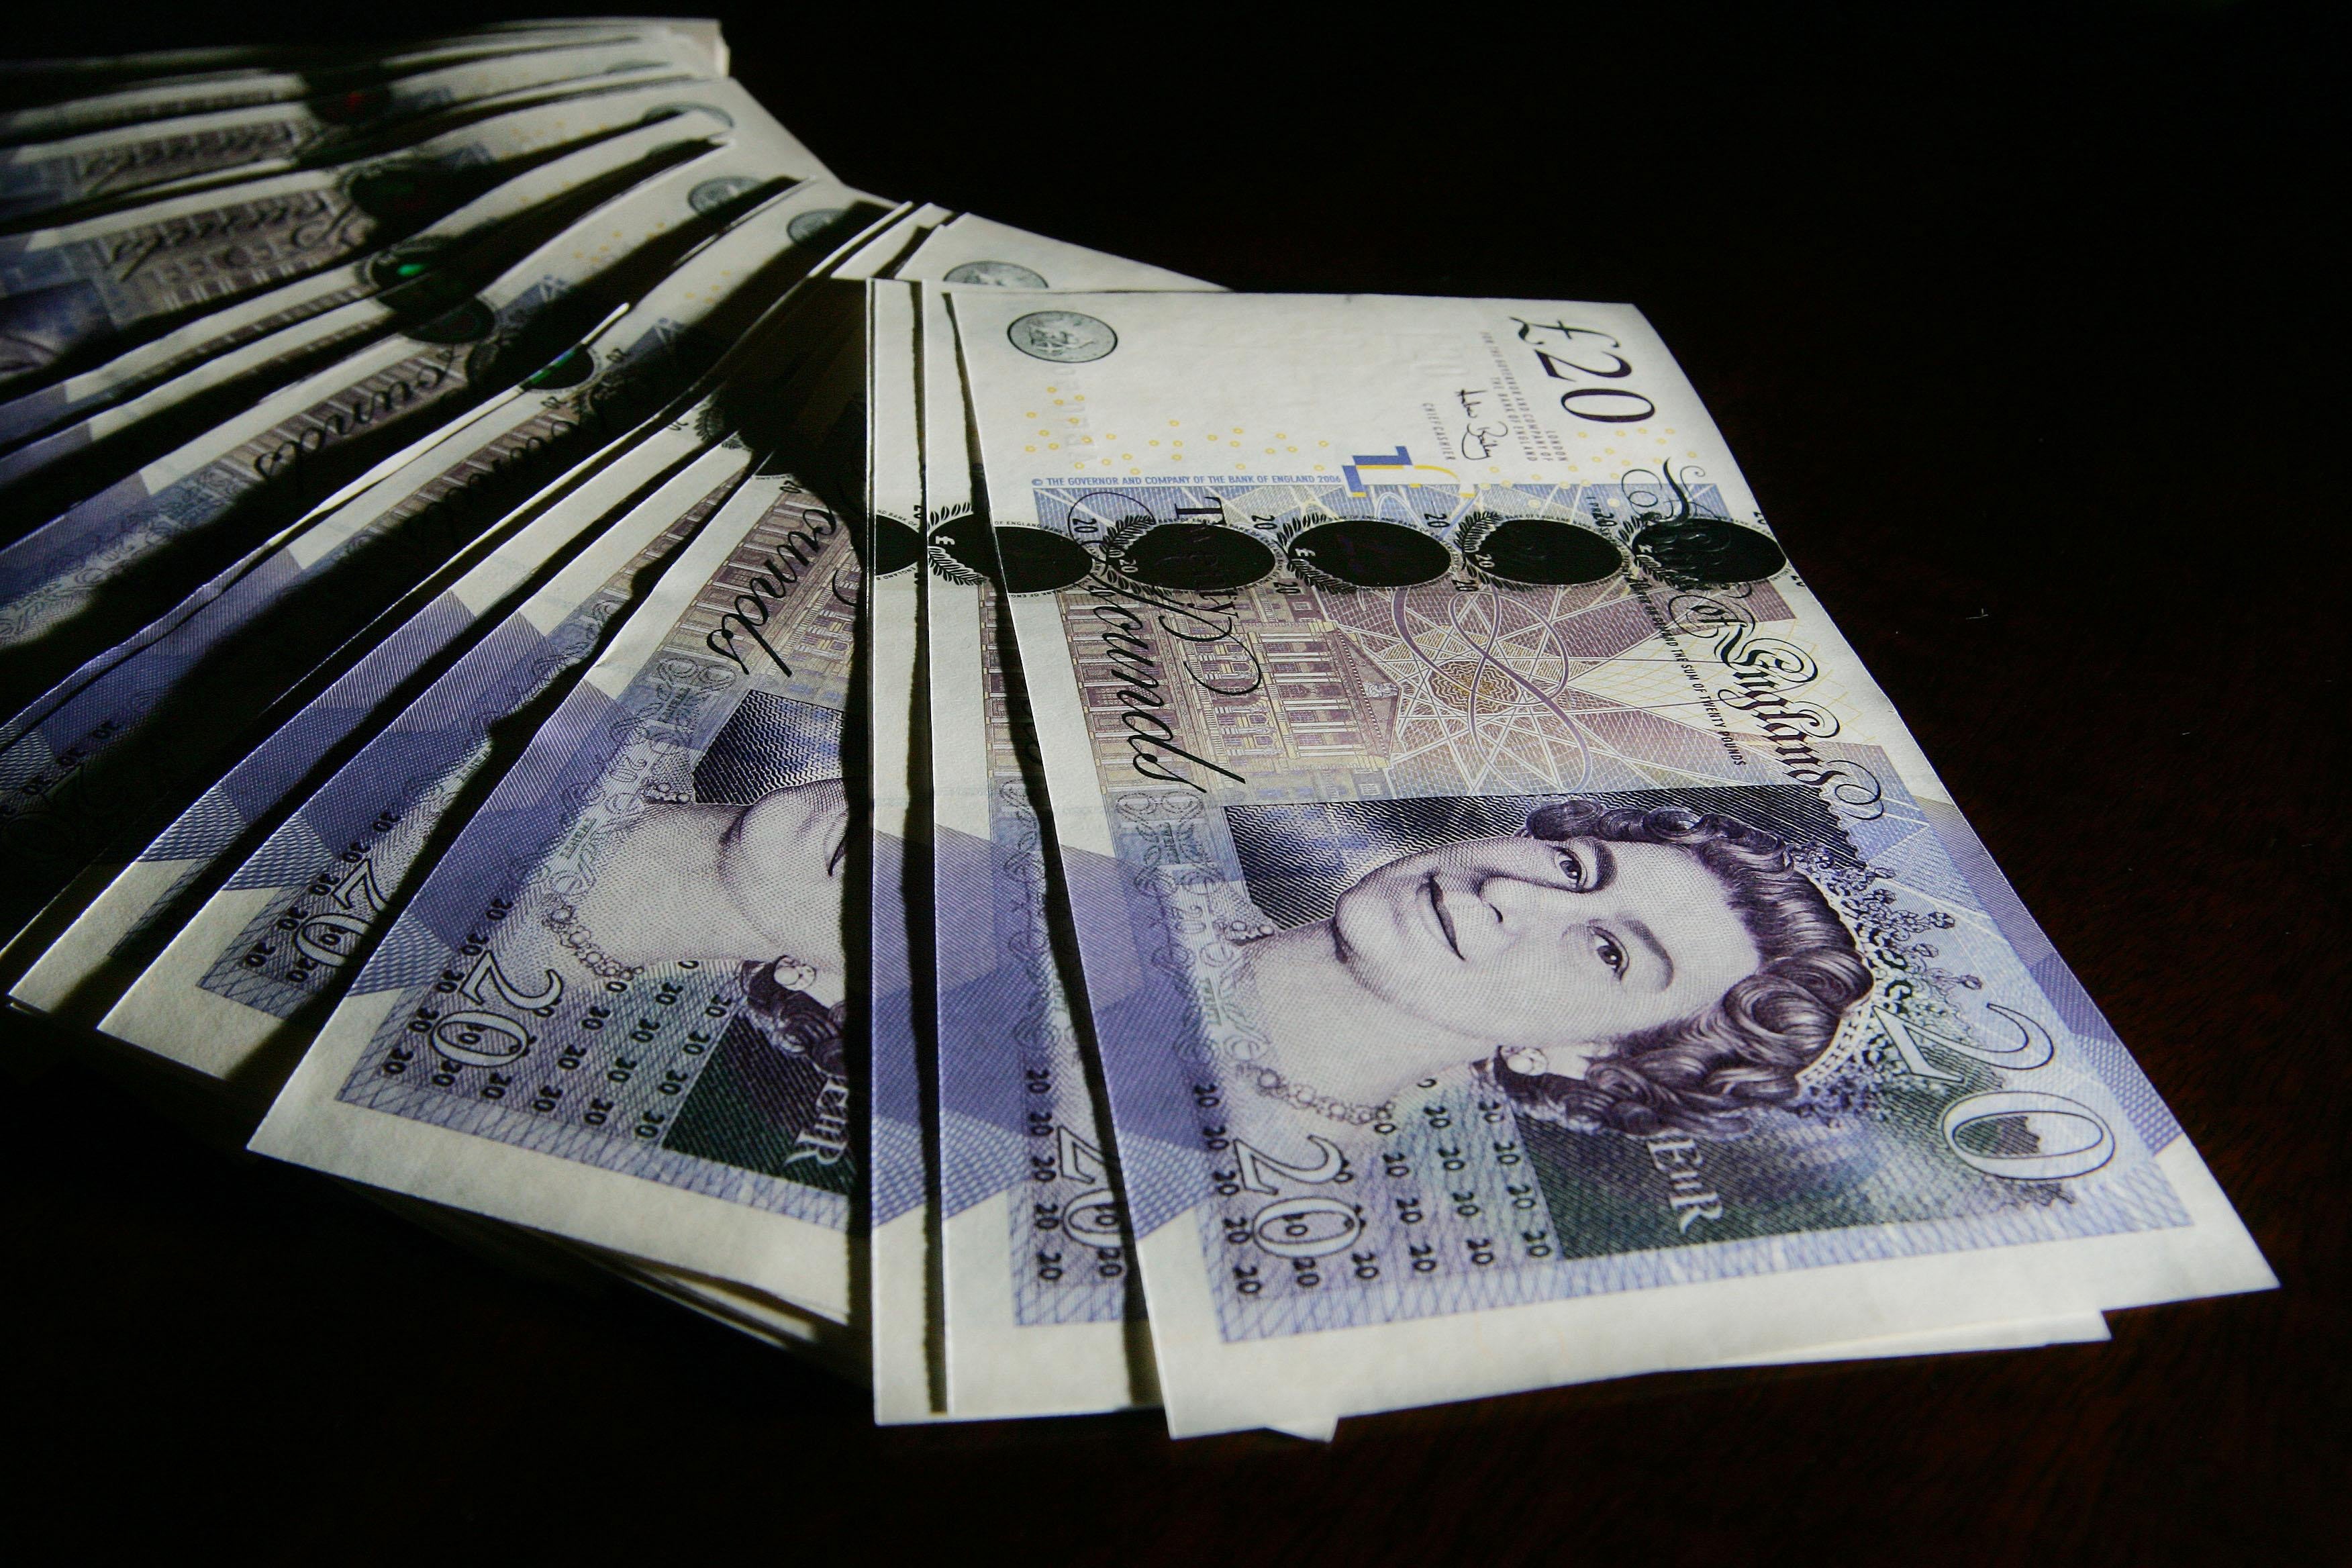 According to the Bank of England, there is more than £11 billion worth of paper £20 and £50 notes still in circulation